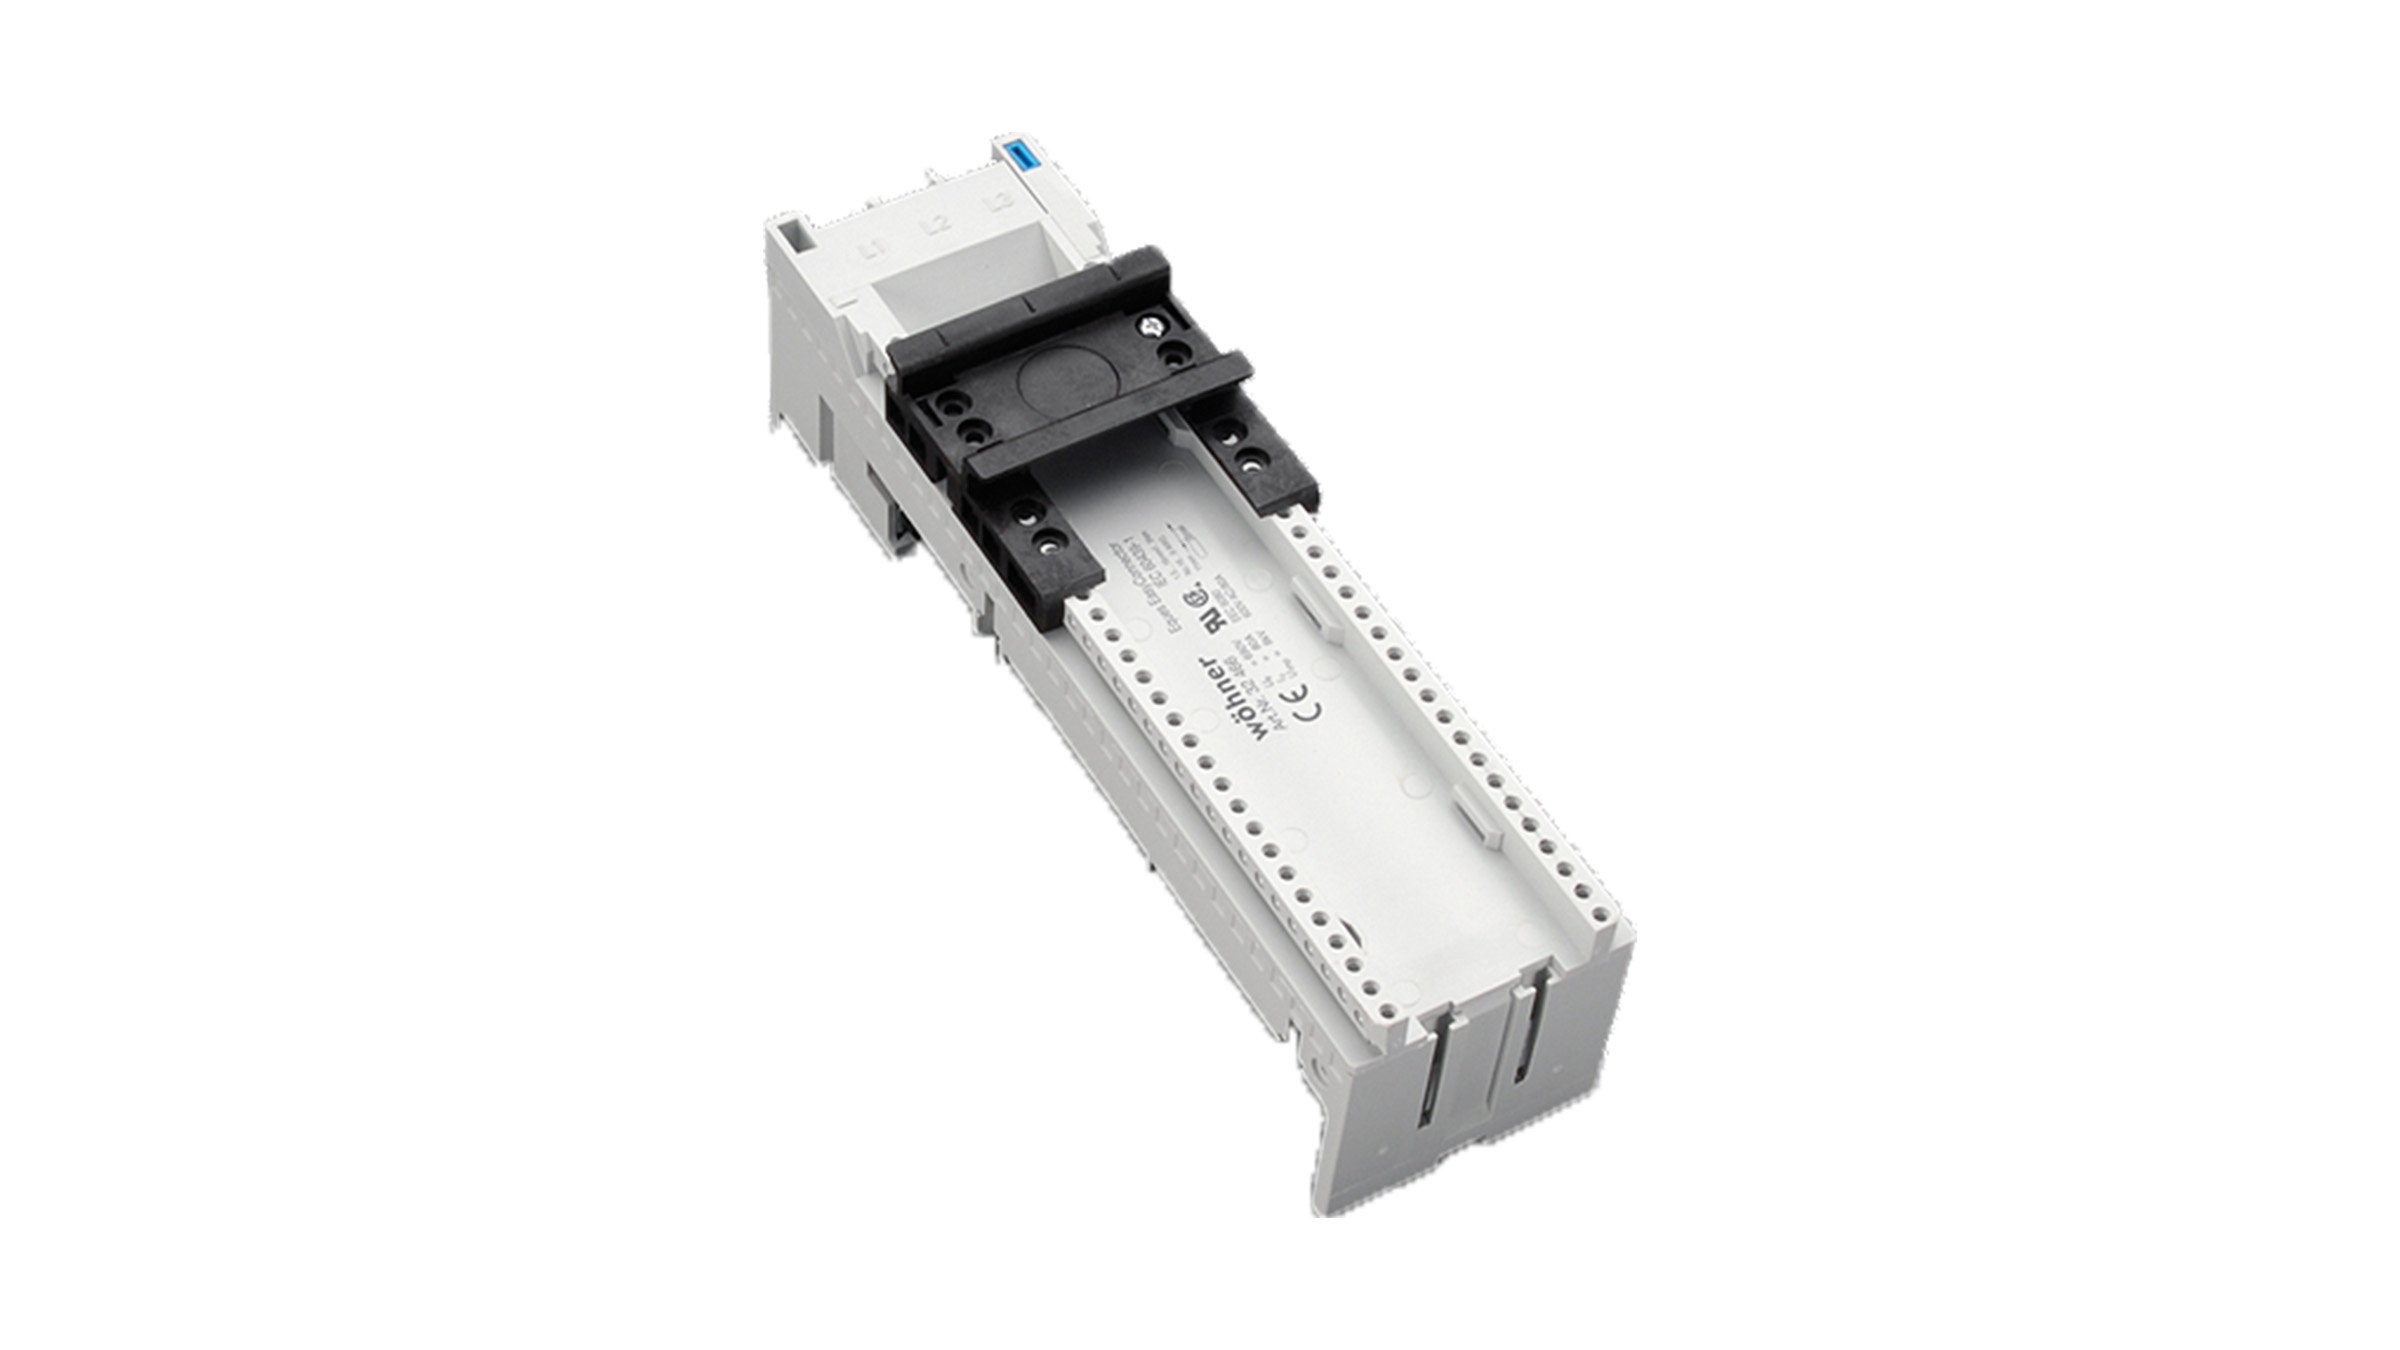 Reduce panel assembly time with a modular bus bar system from the experts at Wohner